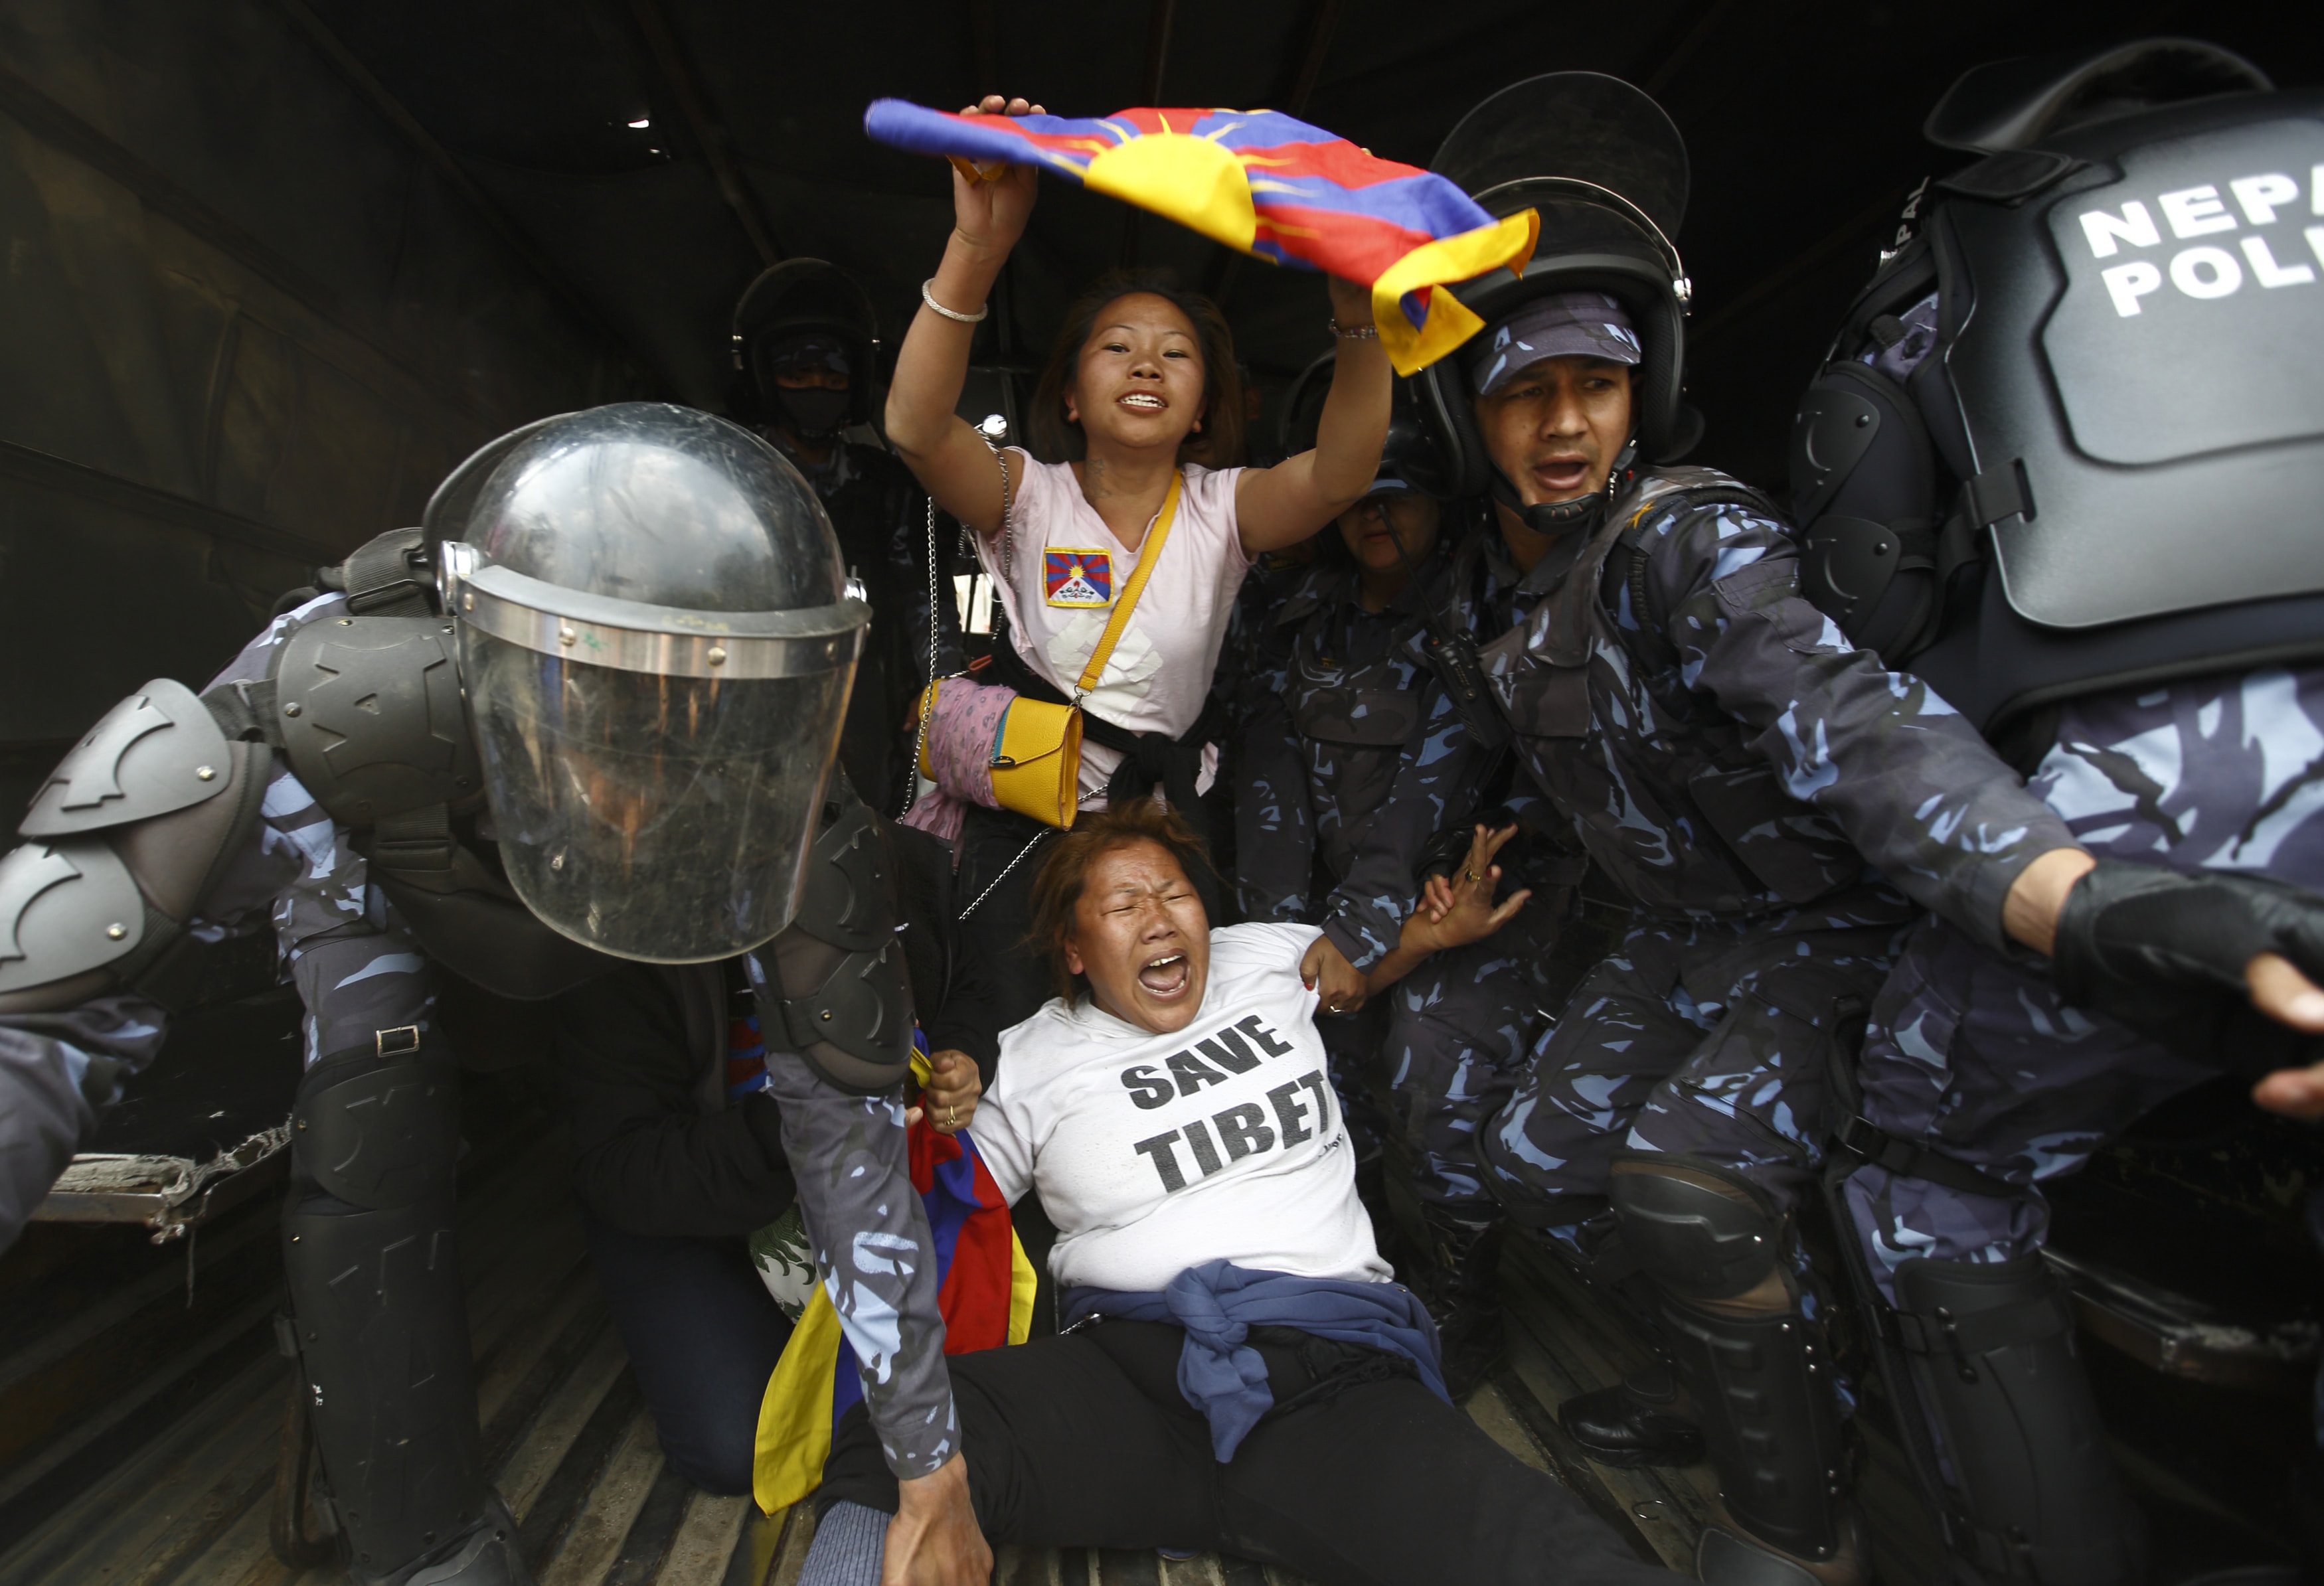 Nepalese police personnel detain Tibetan activists during their protest near the Chinese Embassy Consular office in Kathmandu, 10 March 2014, REUTERS/Navesh Chitrakar